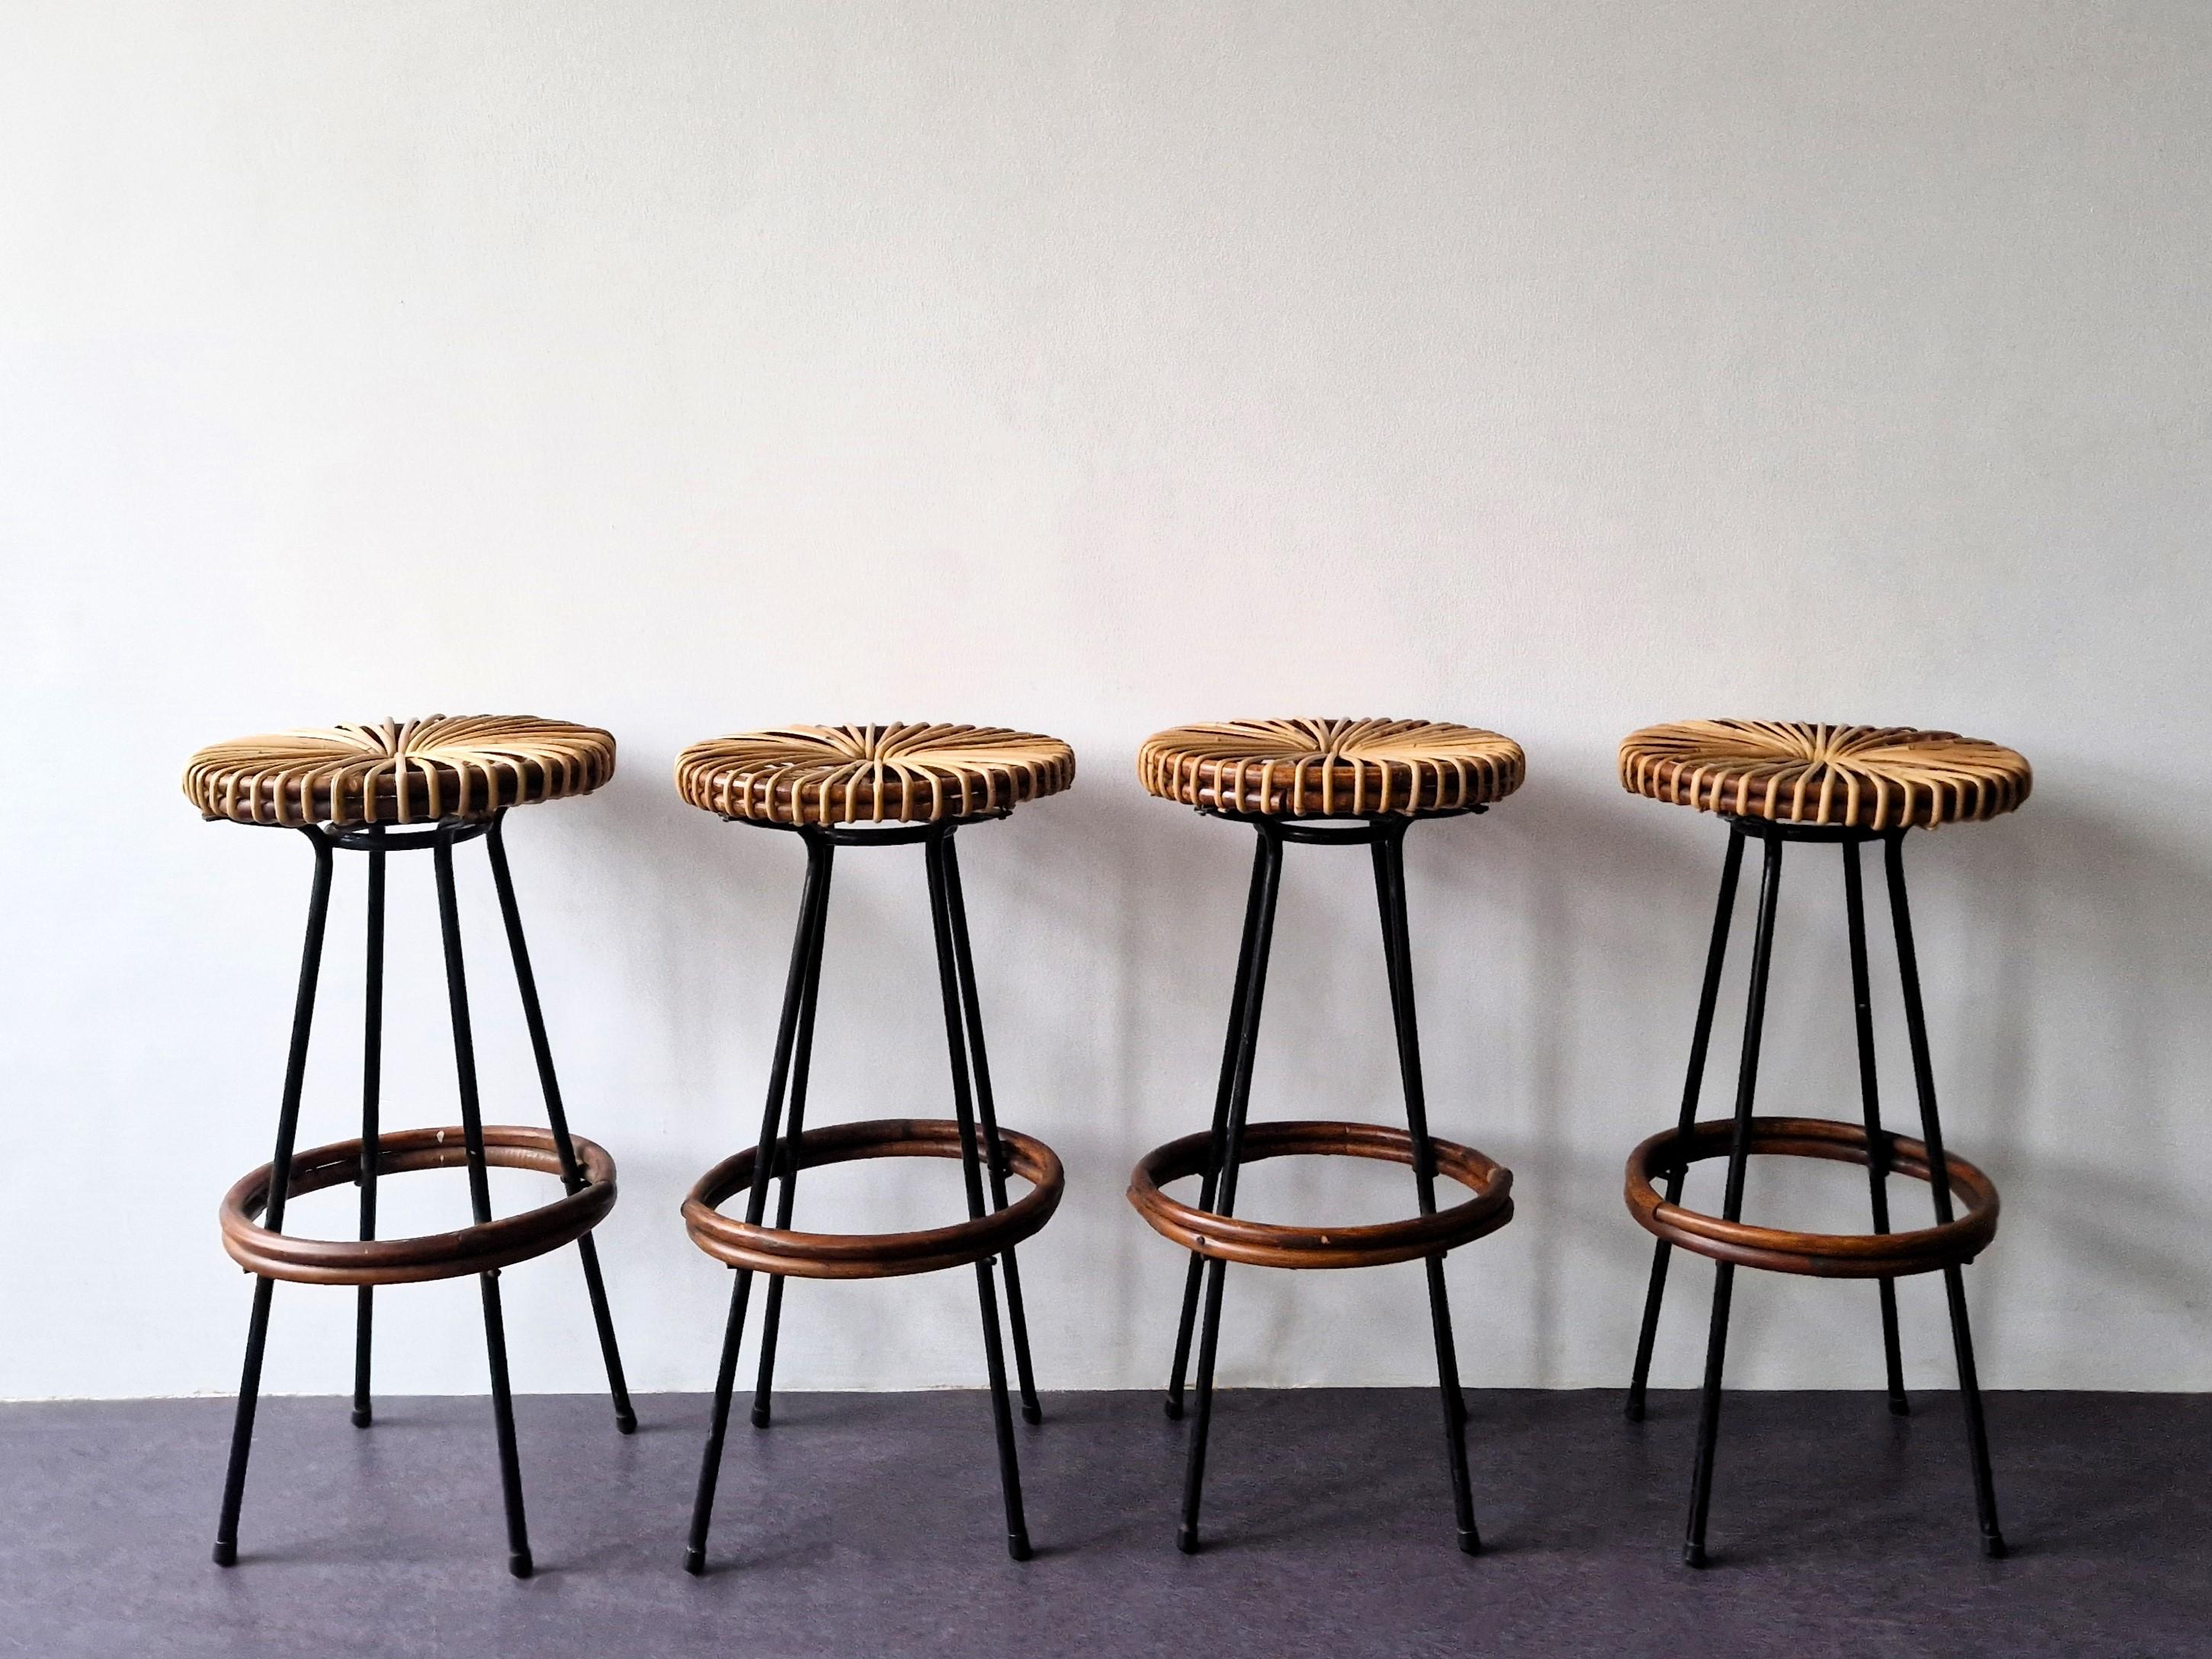 These bar stools were made bij Rohé Noordwolde in the 1960's. We have a set of 4 available. They have a black lacquered metal frame with a rattan seat and footring. The black laquered frame gives a nice contrast to the rattan. These bar stools are